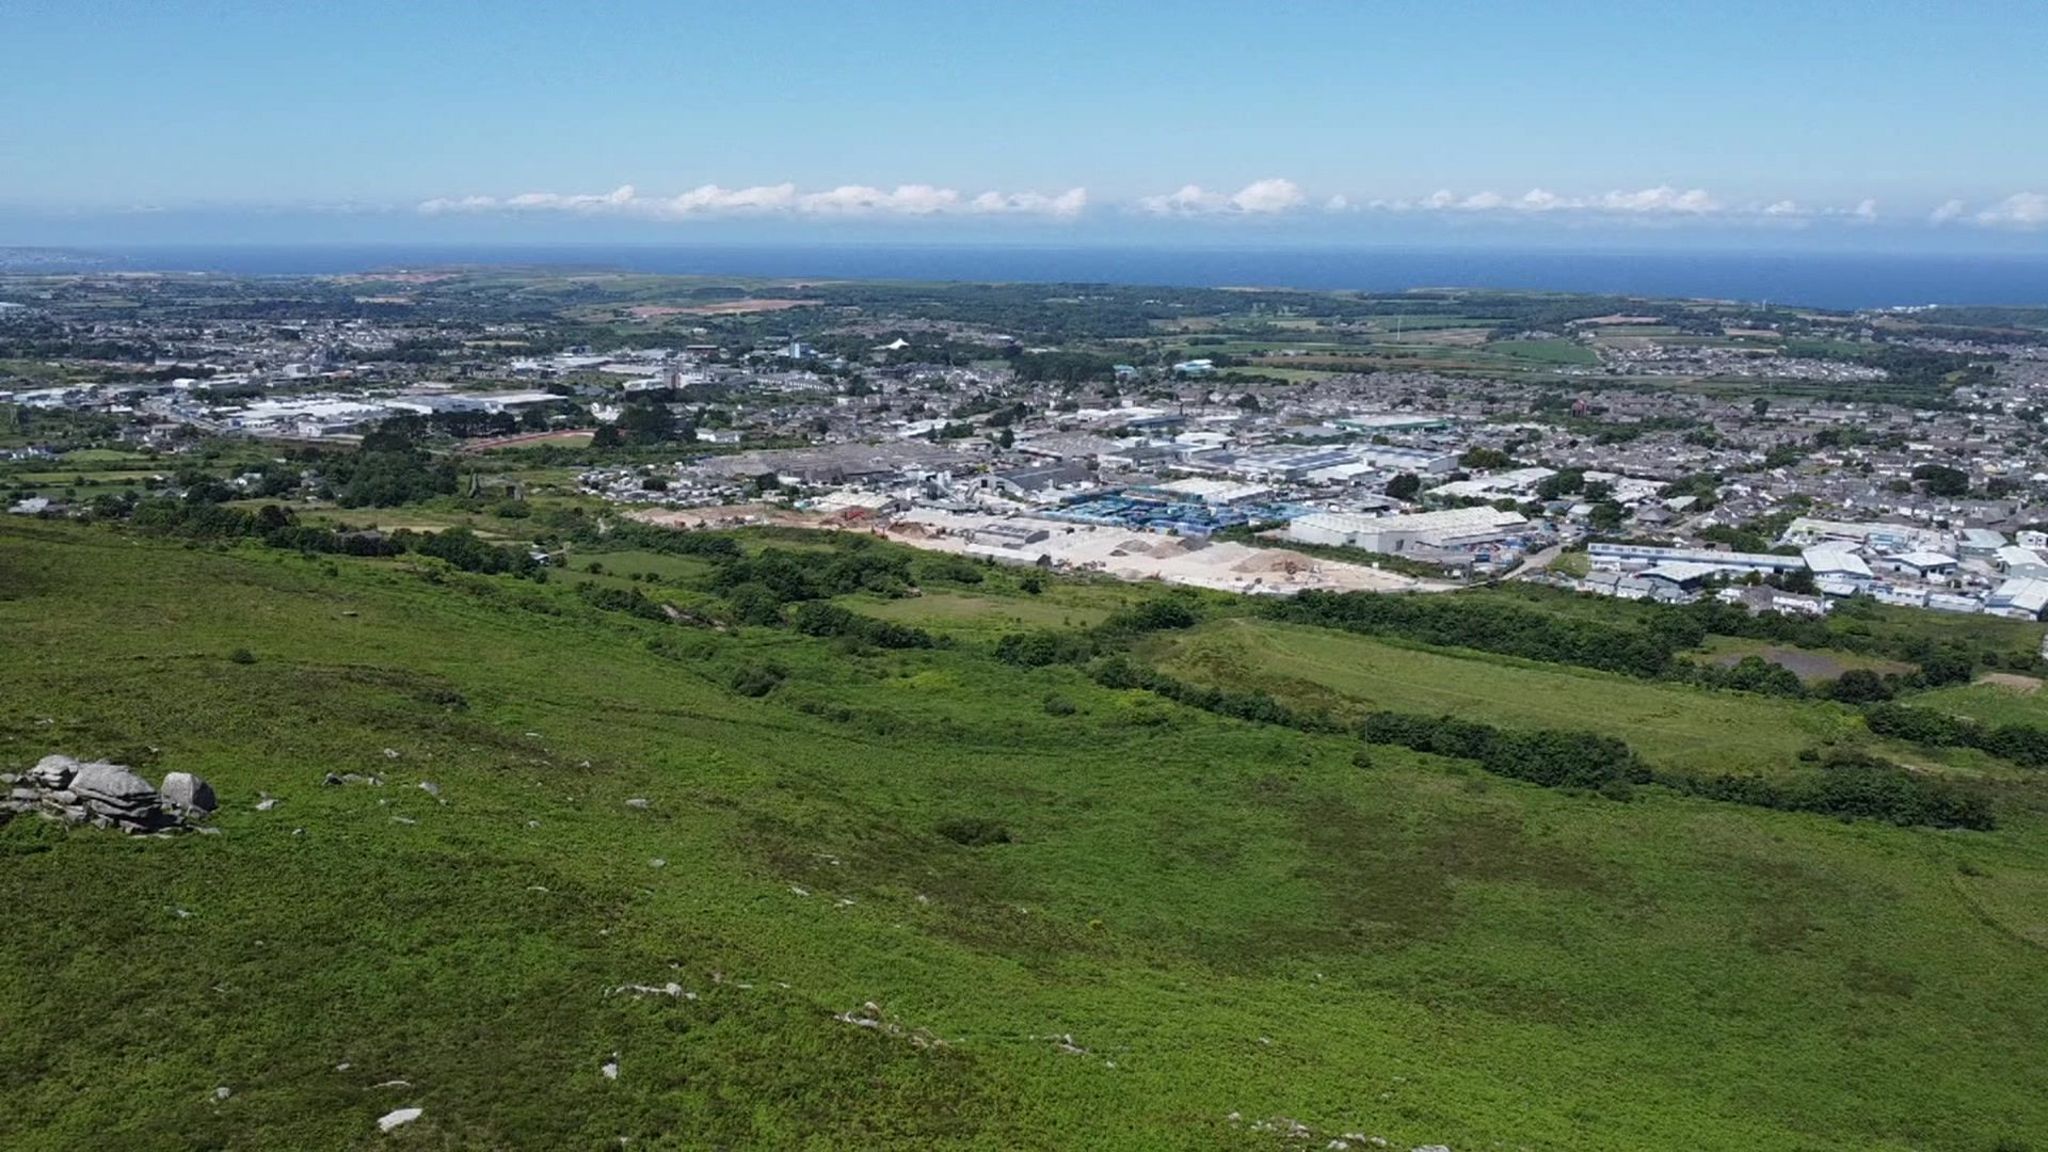 An aerial photo showing Camborne and beyond to the coast